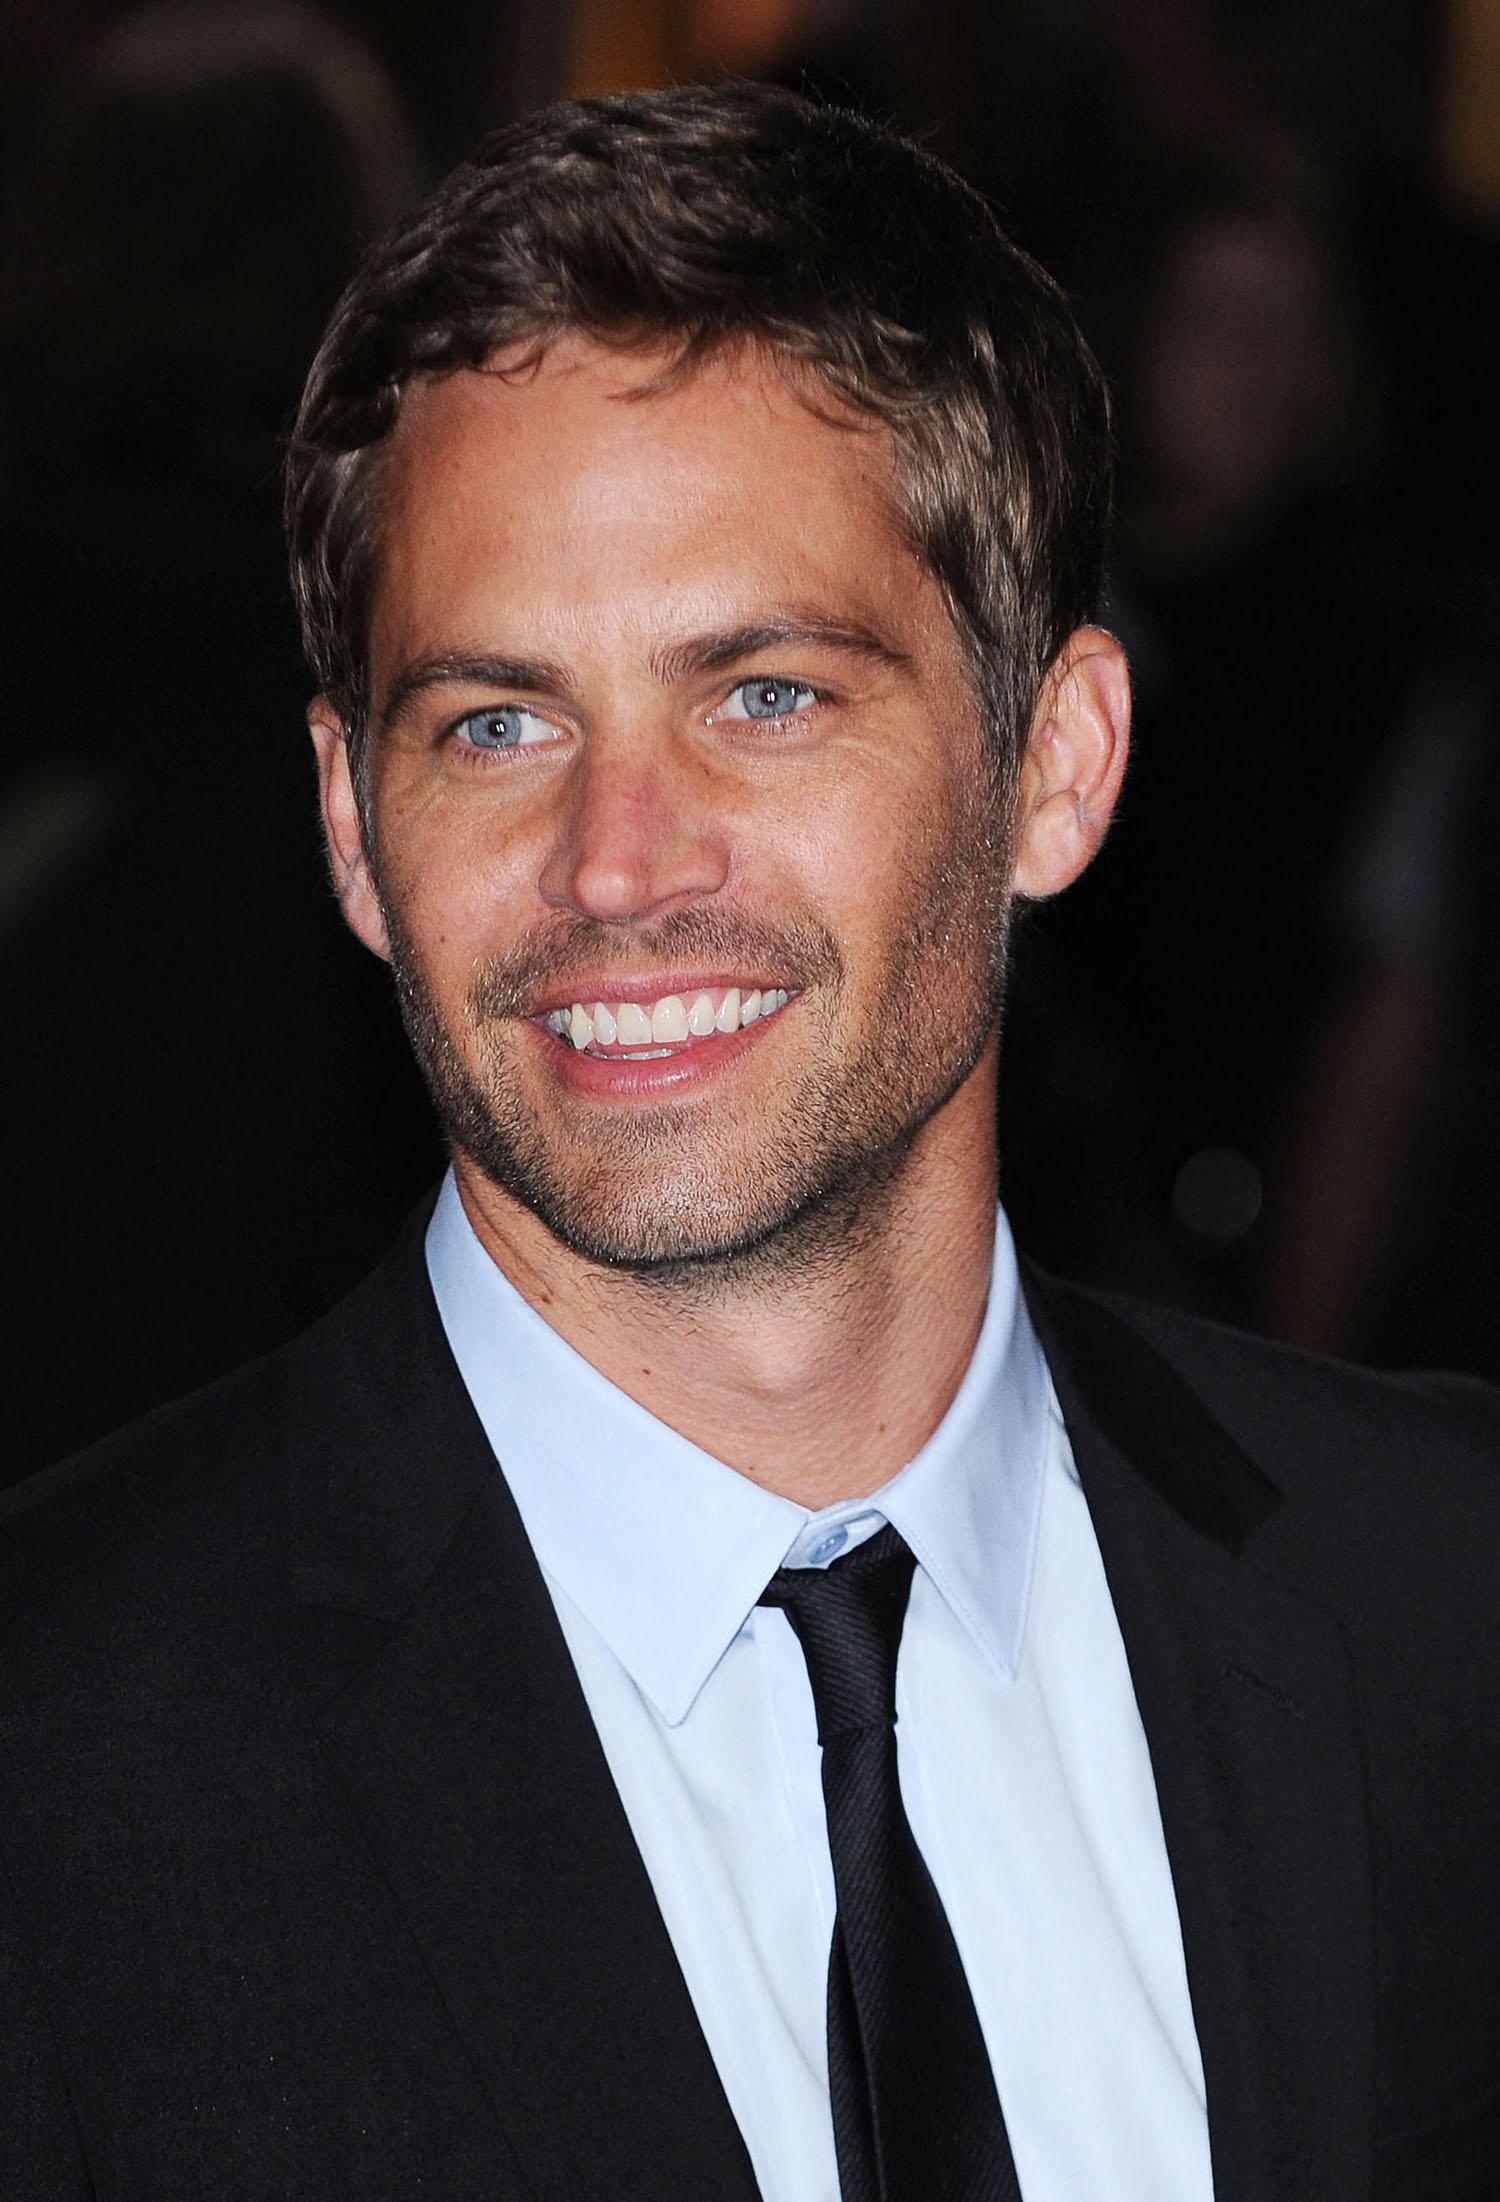 LATE PAUL WALKER AT 2009 UK FILM PREMIERE OF "FAST AND FURIOUS"